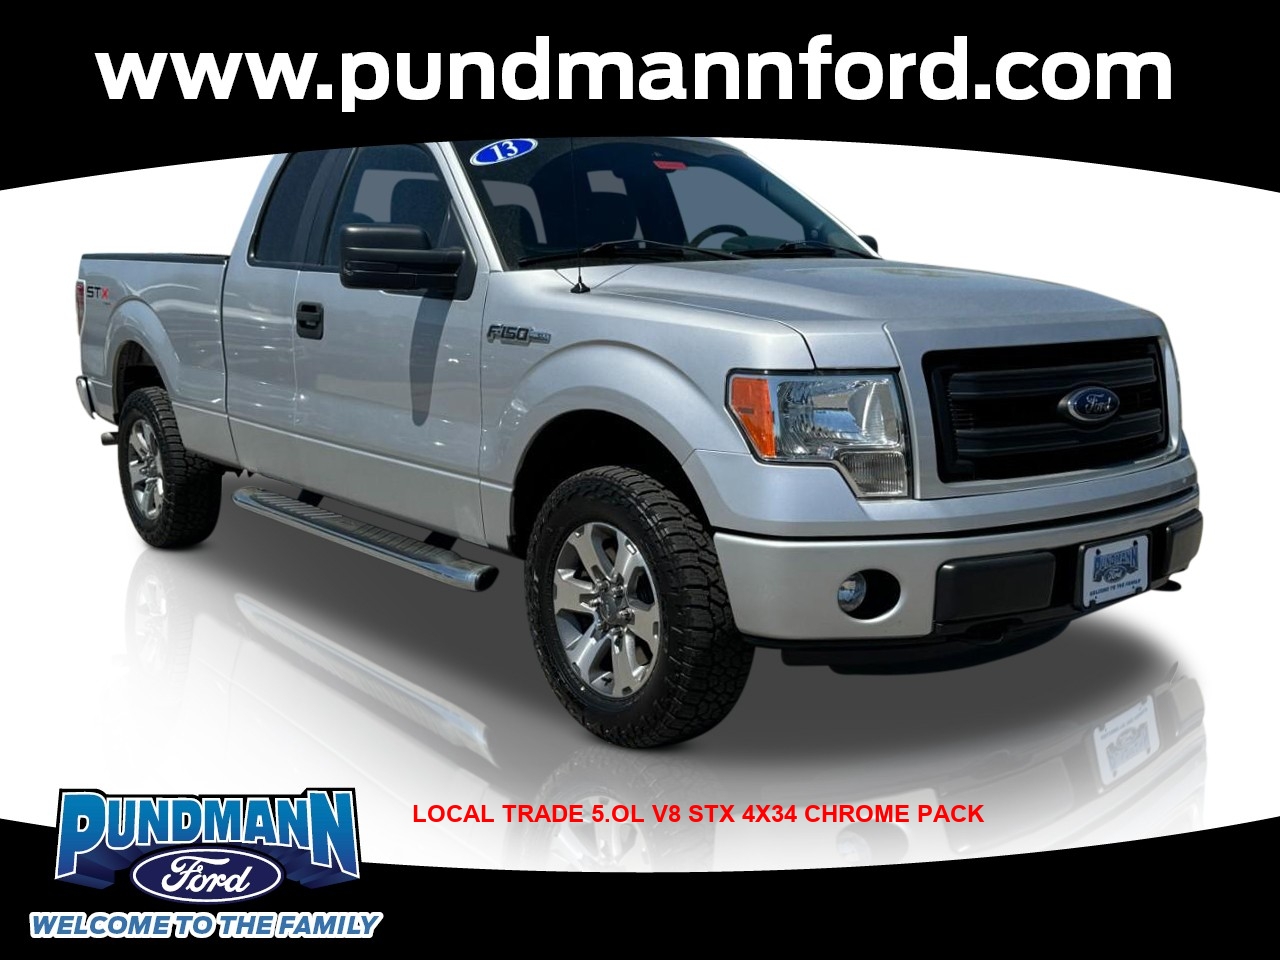 The 2013 Ford F-150 Lariat photos